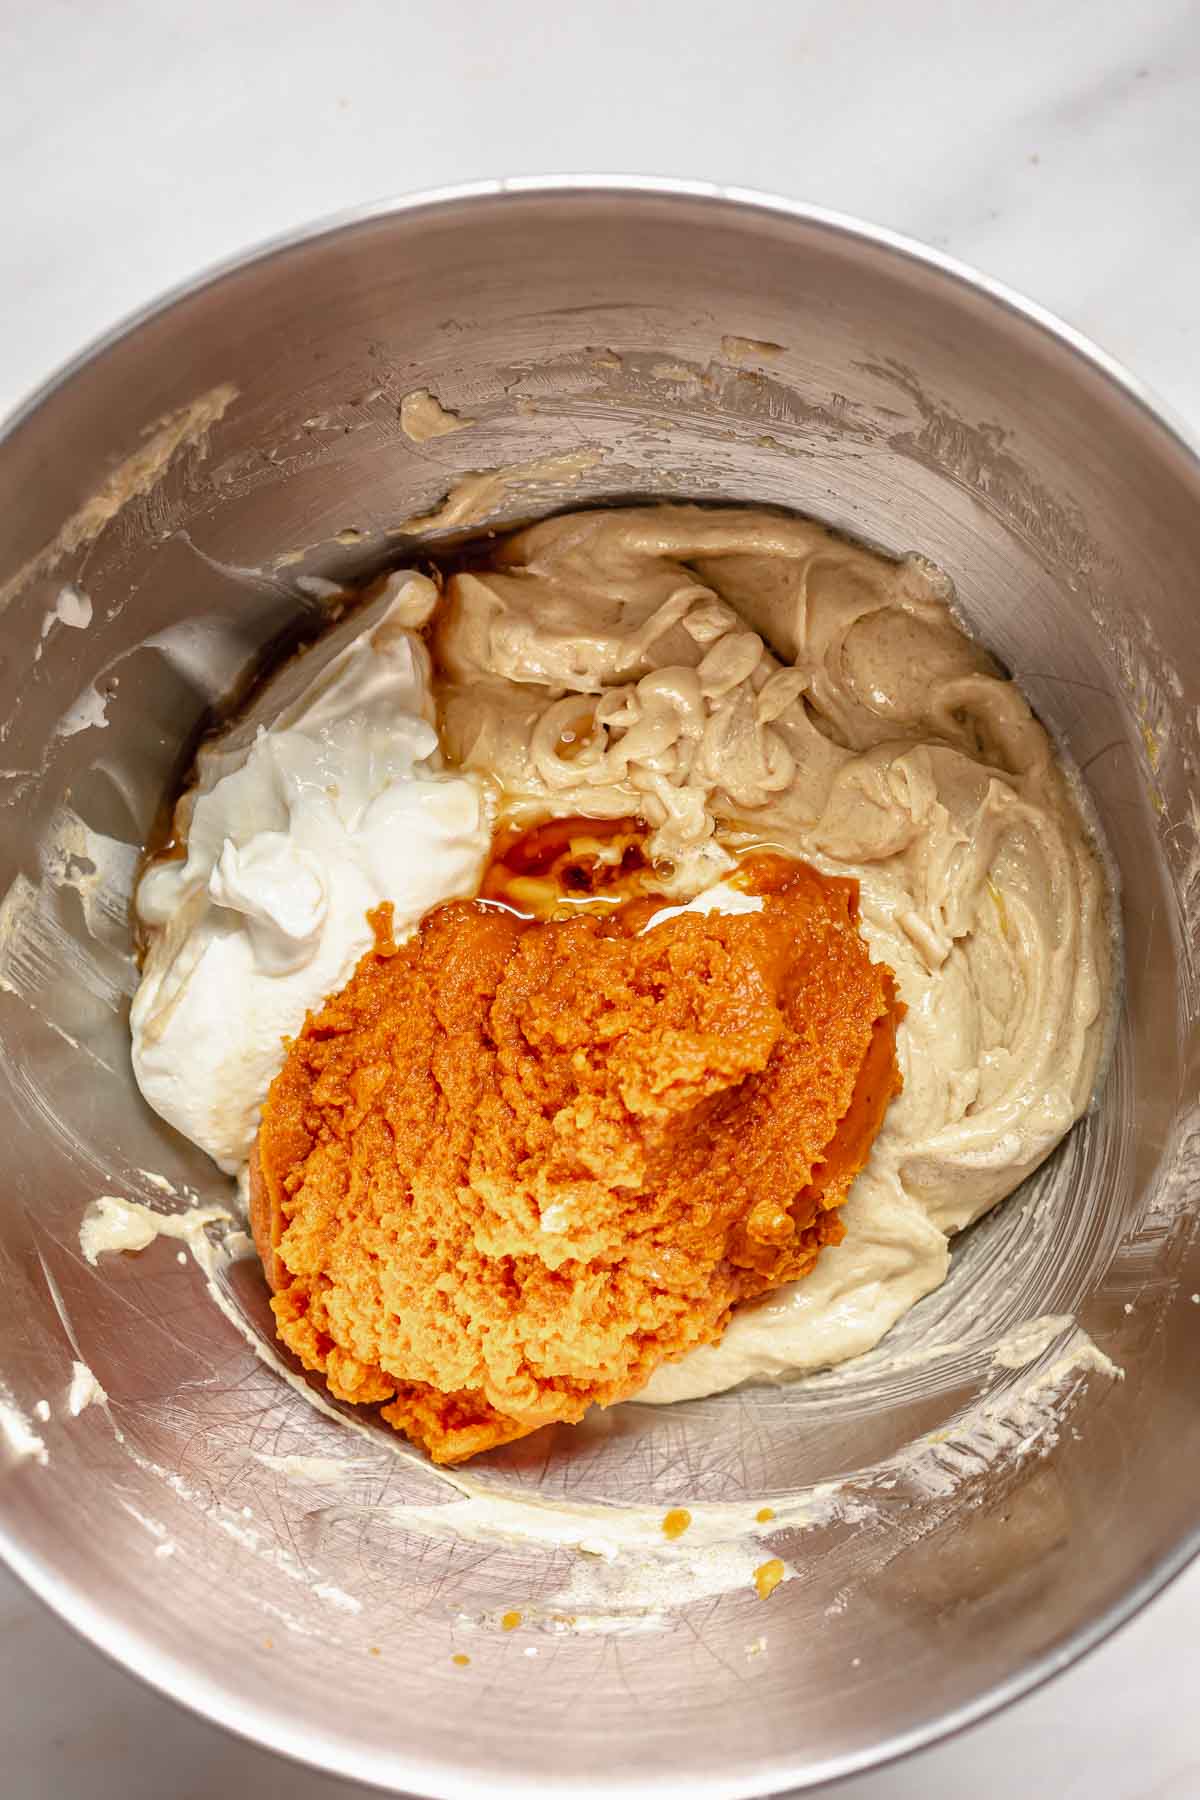 Pumpkin puree and sour cream in the bowl with the batter.